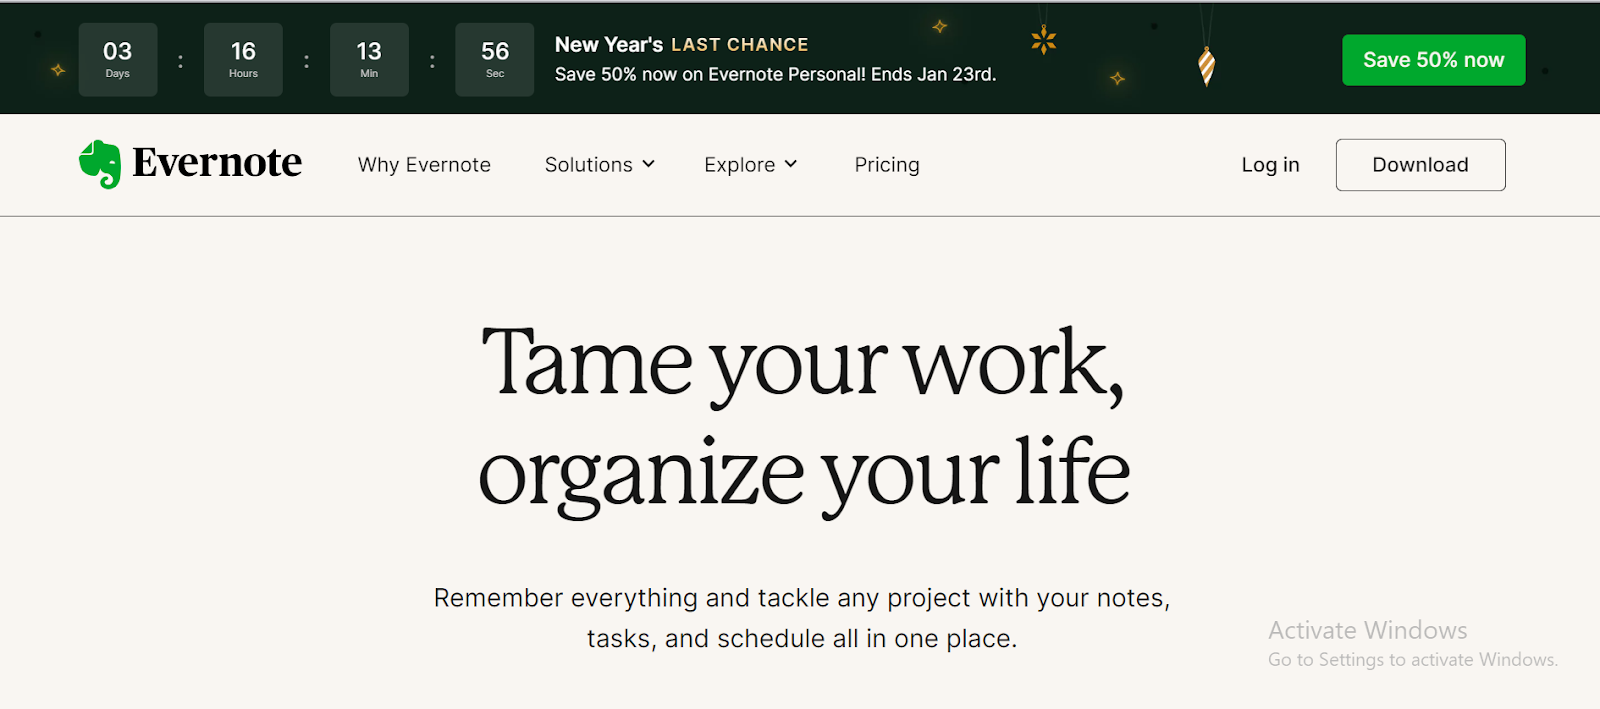 Productivity Tools for Remote Workers - Evernote